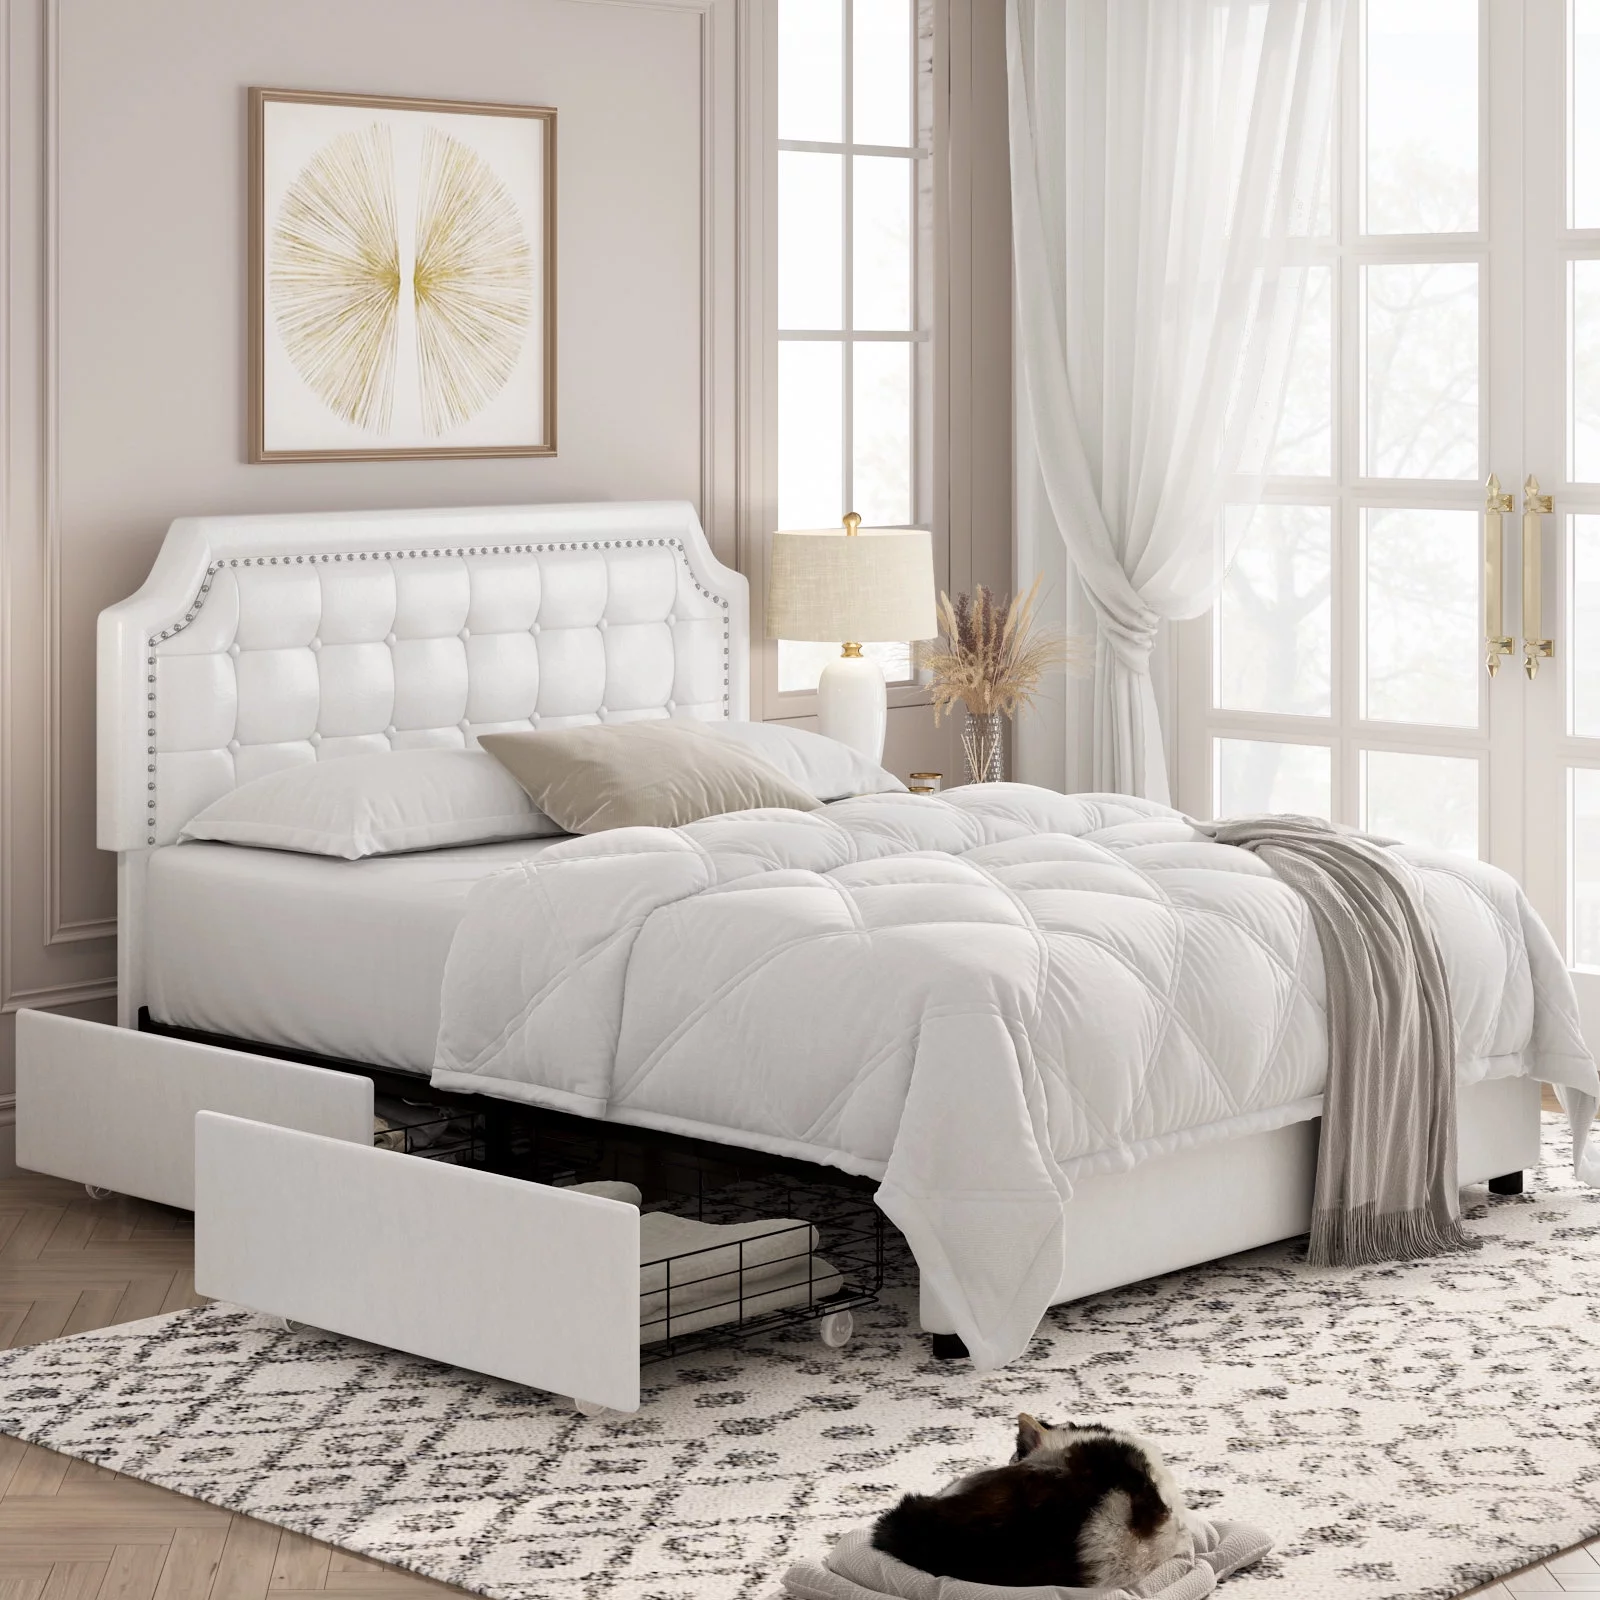 Homfa Full Size Storage Bed, 4 Drawers PU Leather Platform Bed Frame with Adjustable Upholstered Headboard, White